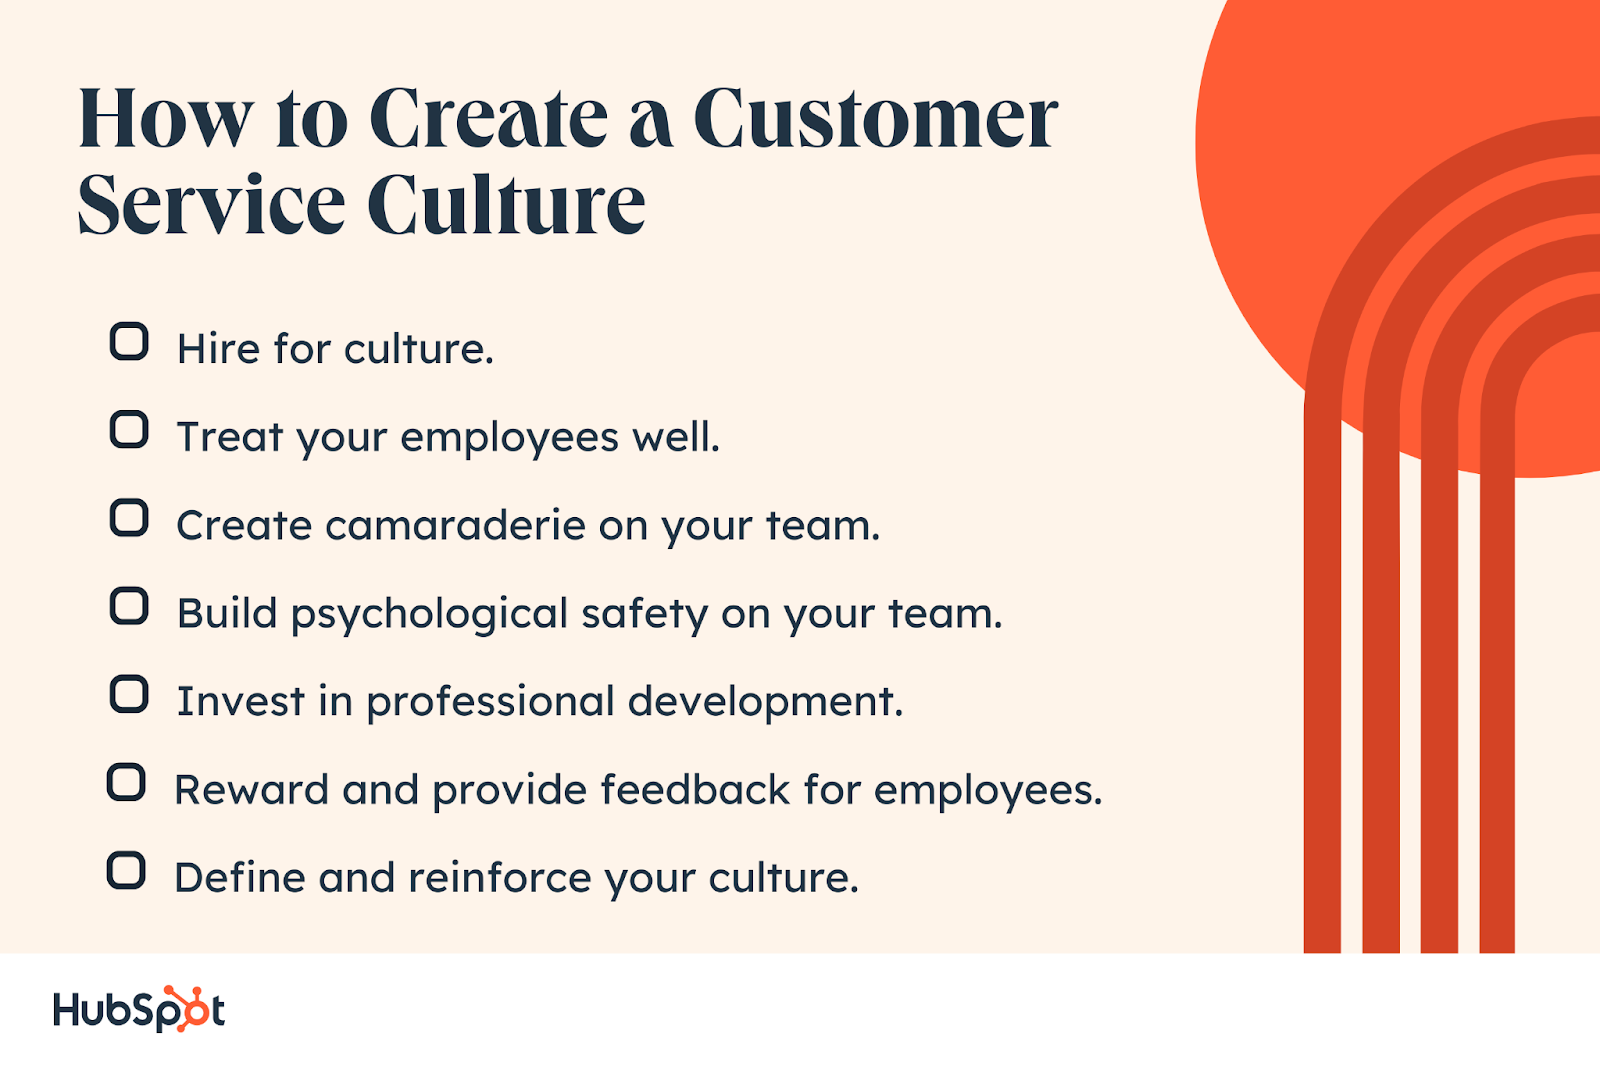 How to Create a Customer Service Culture. Hire for culture. Treat your employees well. Create camaraderie on your team. Build psychological safety on your team. Invest in professional development. Reward and provide feedback for employees. Define and reinforce your culture.